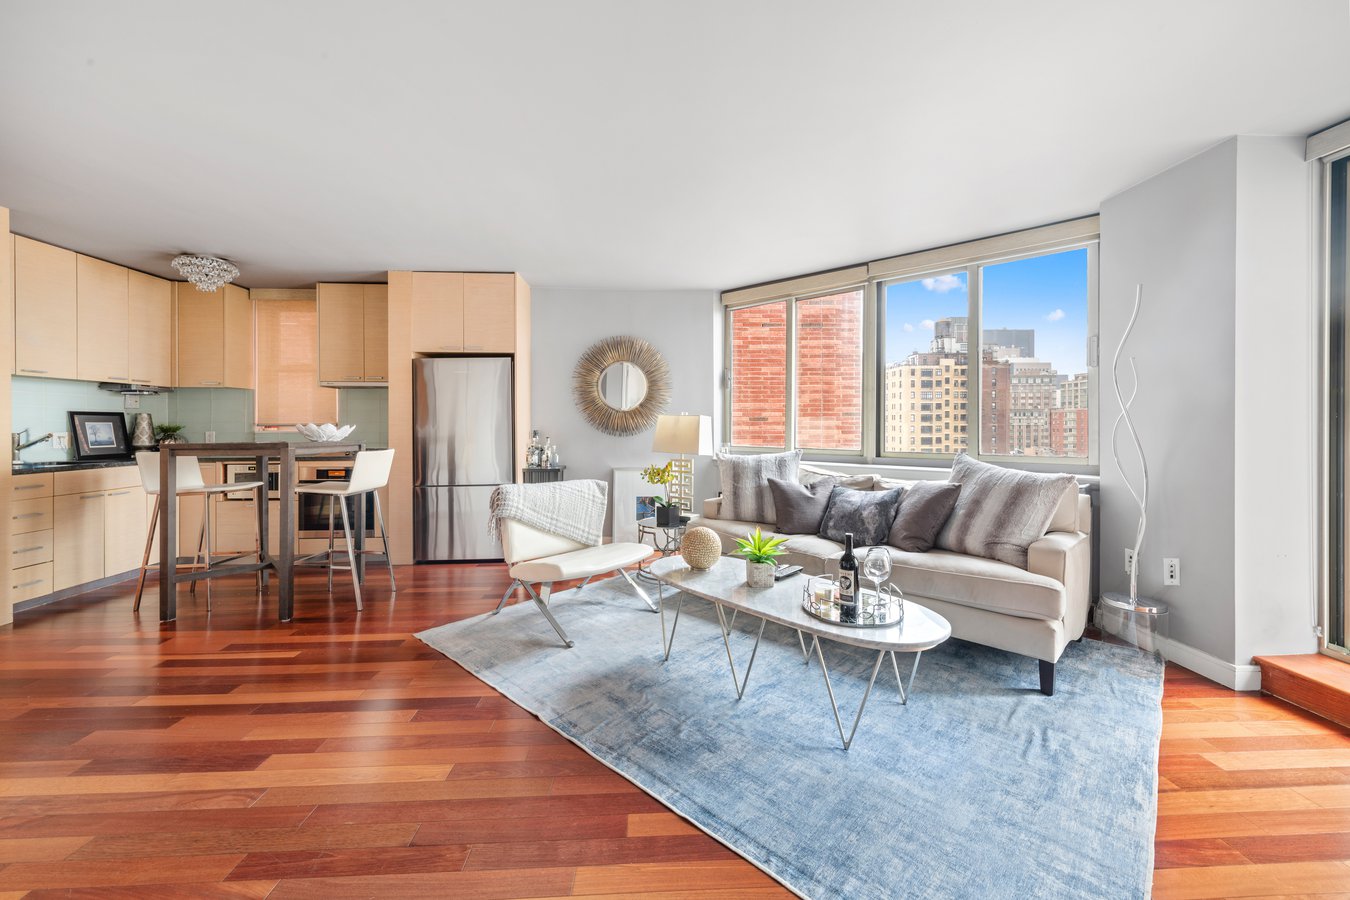 206 East 95th Street 15B, Yorkville, Upper East Side, NYC - 2 Bedrooms  
2 Bathrooms  
5 Rooms - 